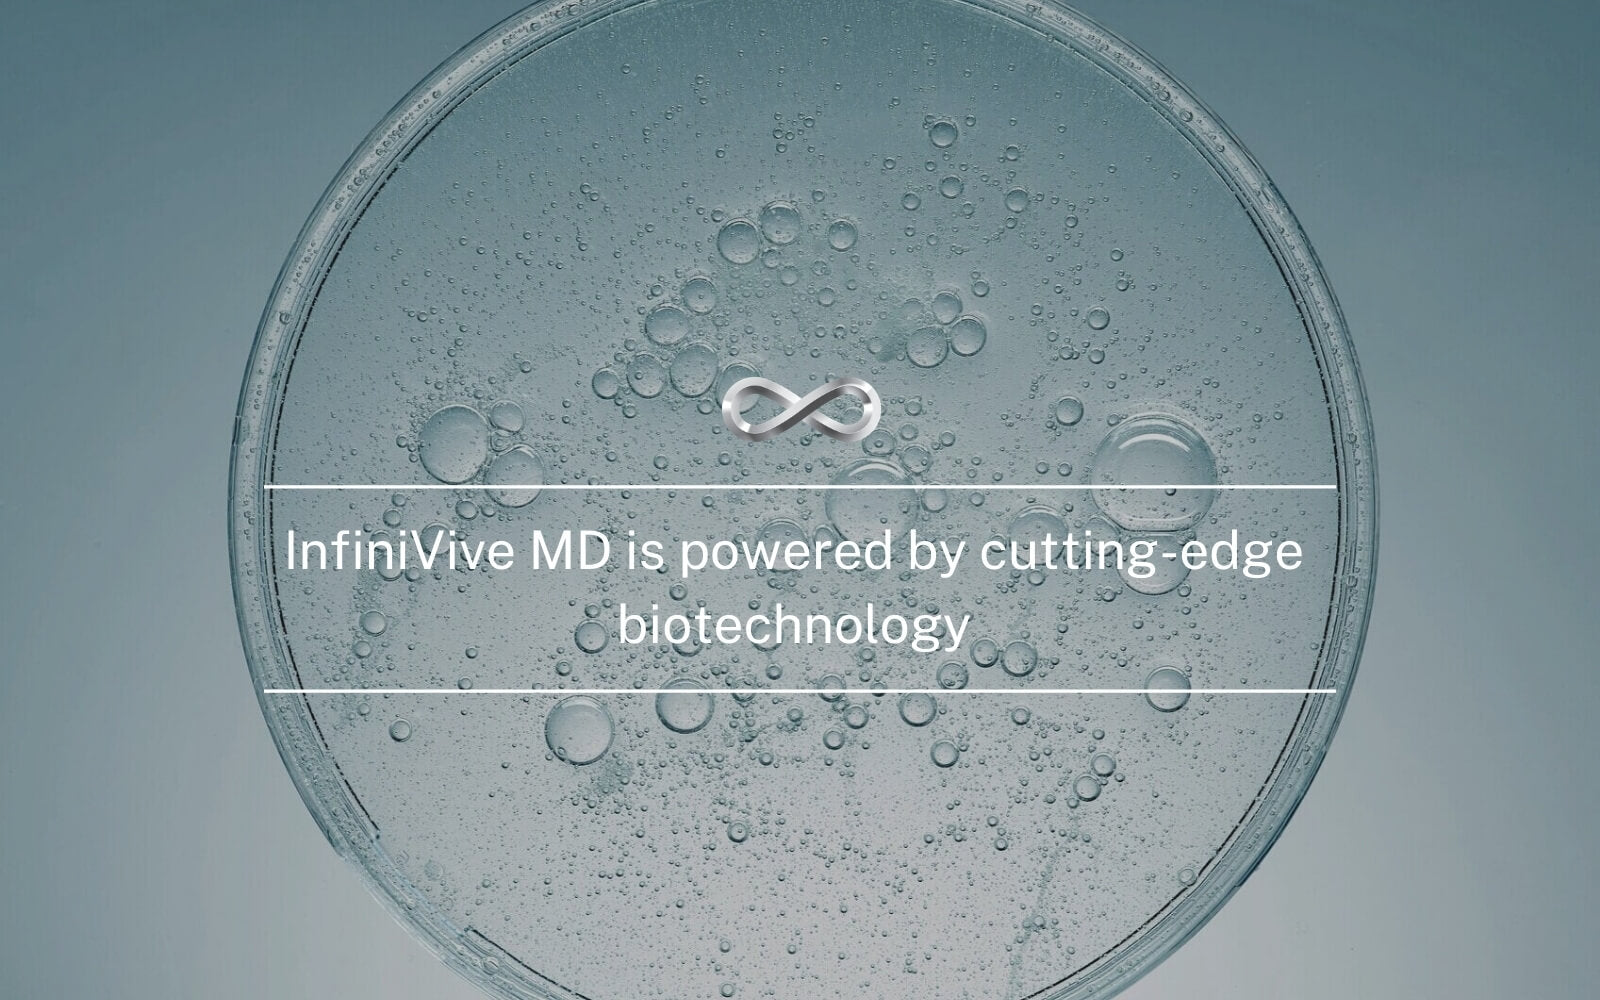 Infinivive is powered by cutting-edge biotechnology